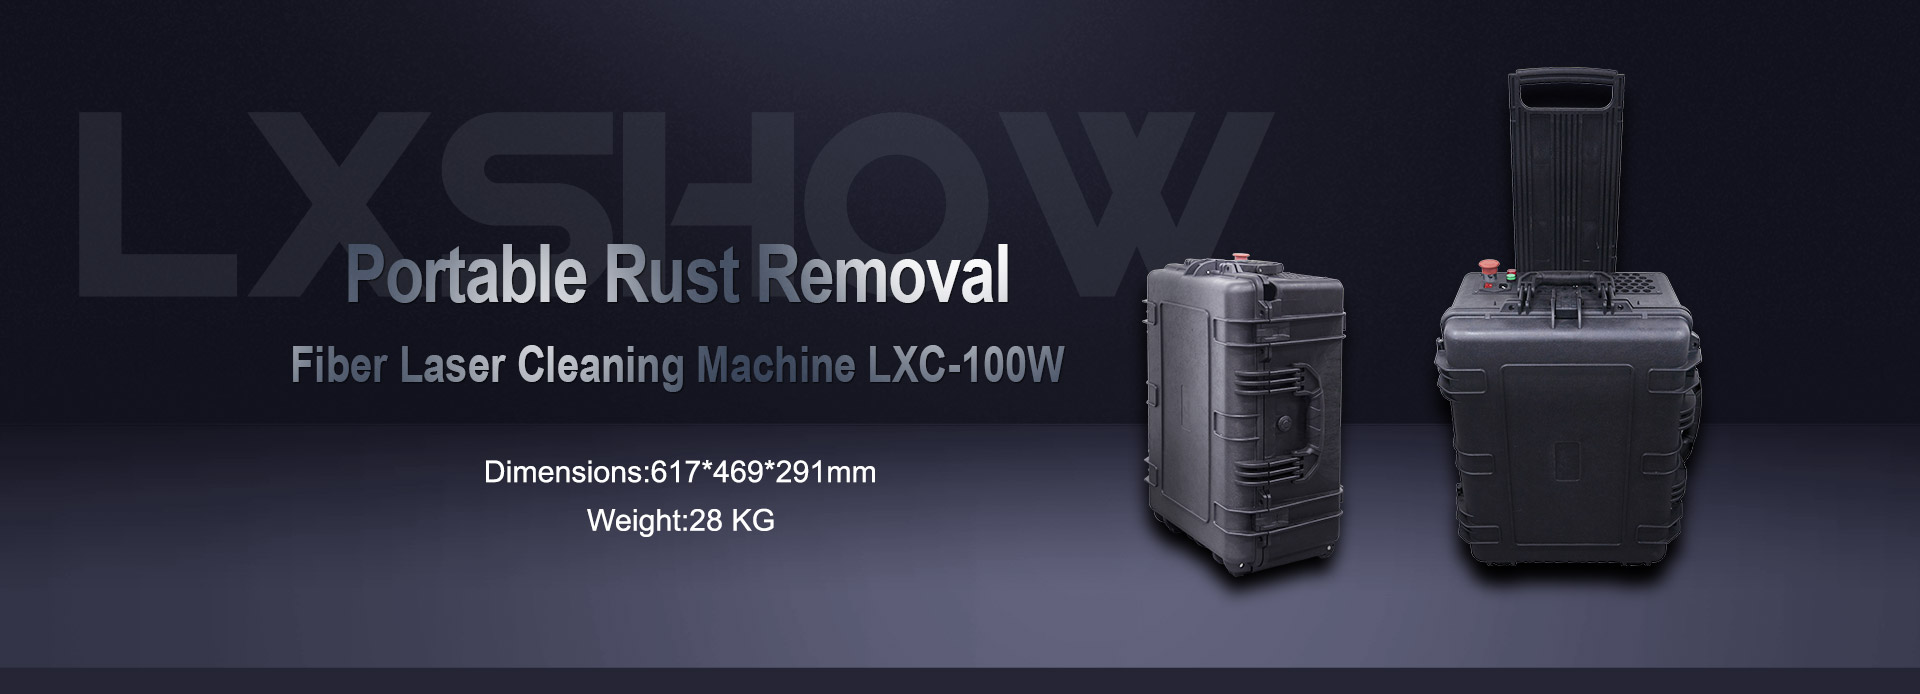 LXC-100W Handheld Portable Rust Removal Fiber Laser Cleaning Machine for Sale